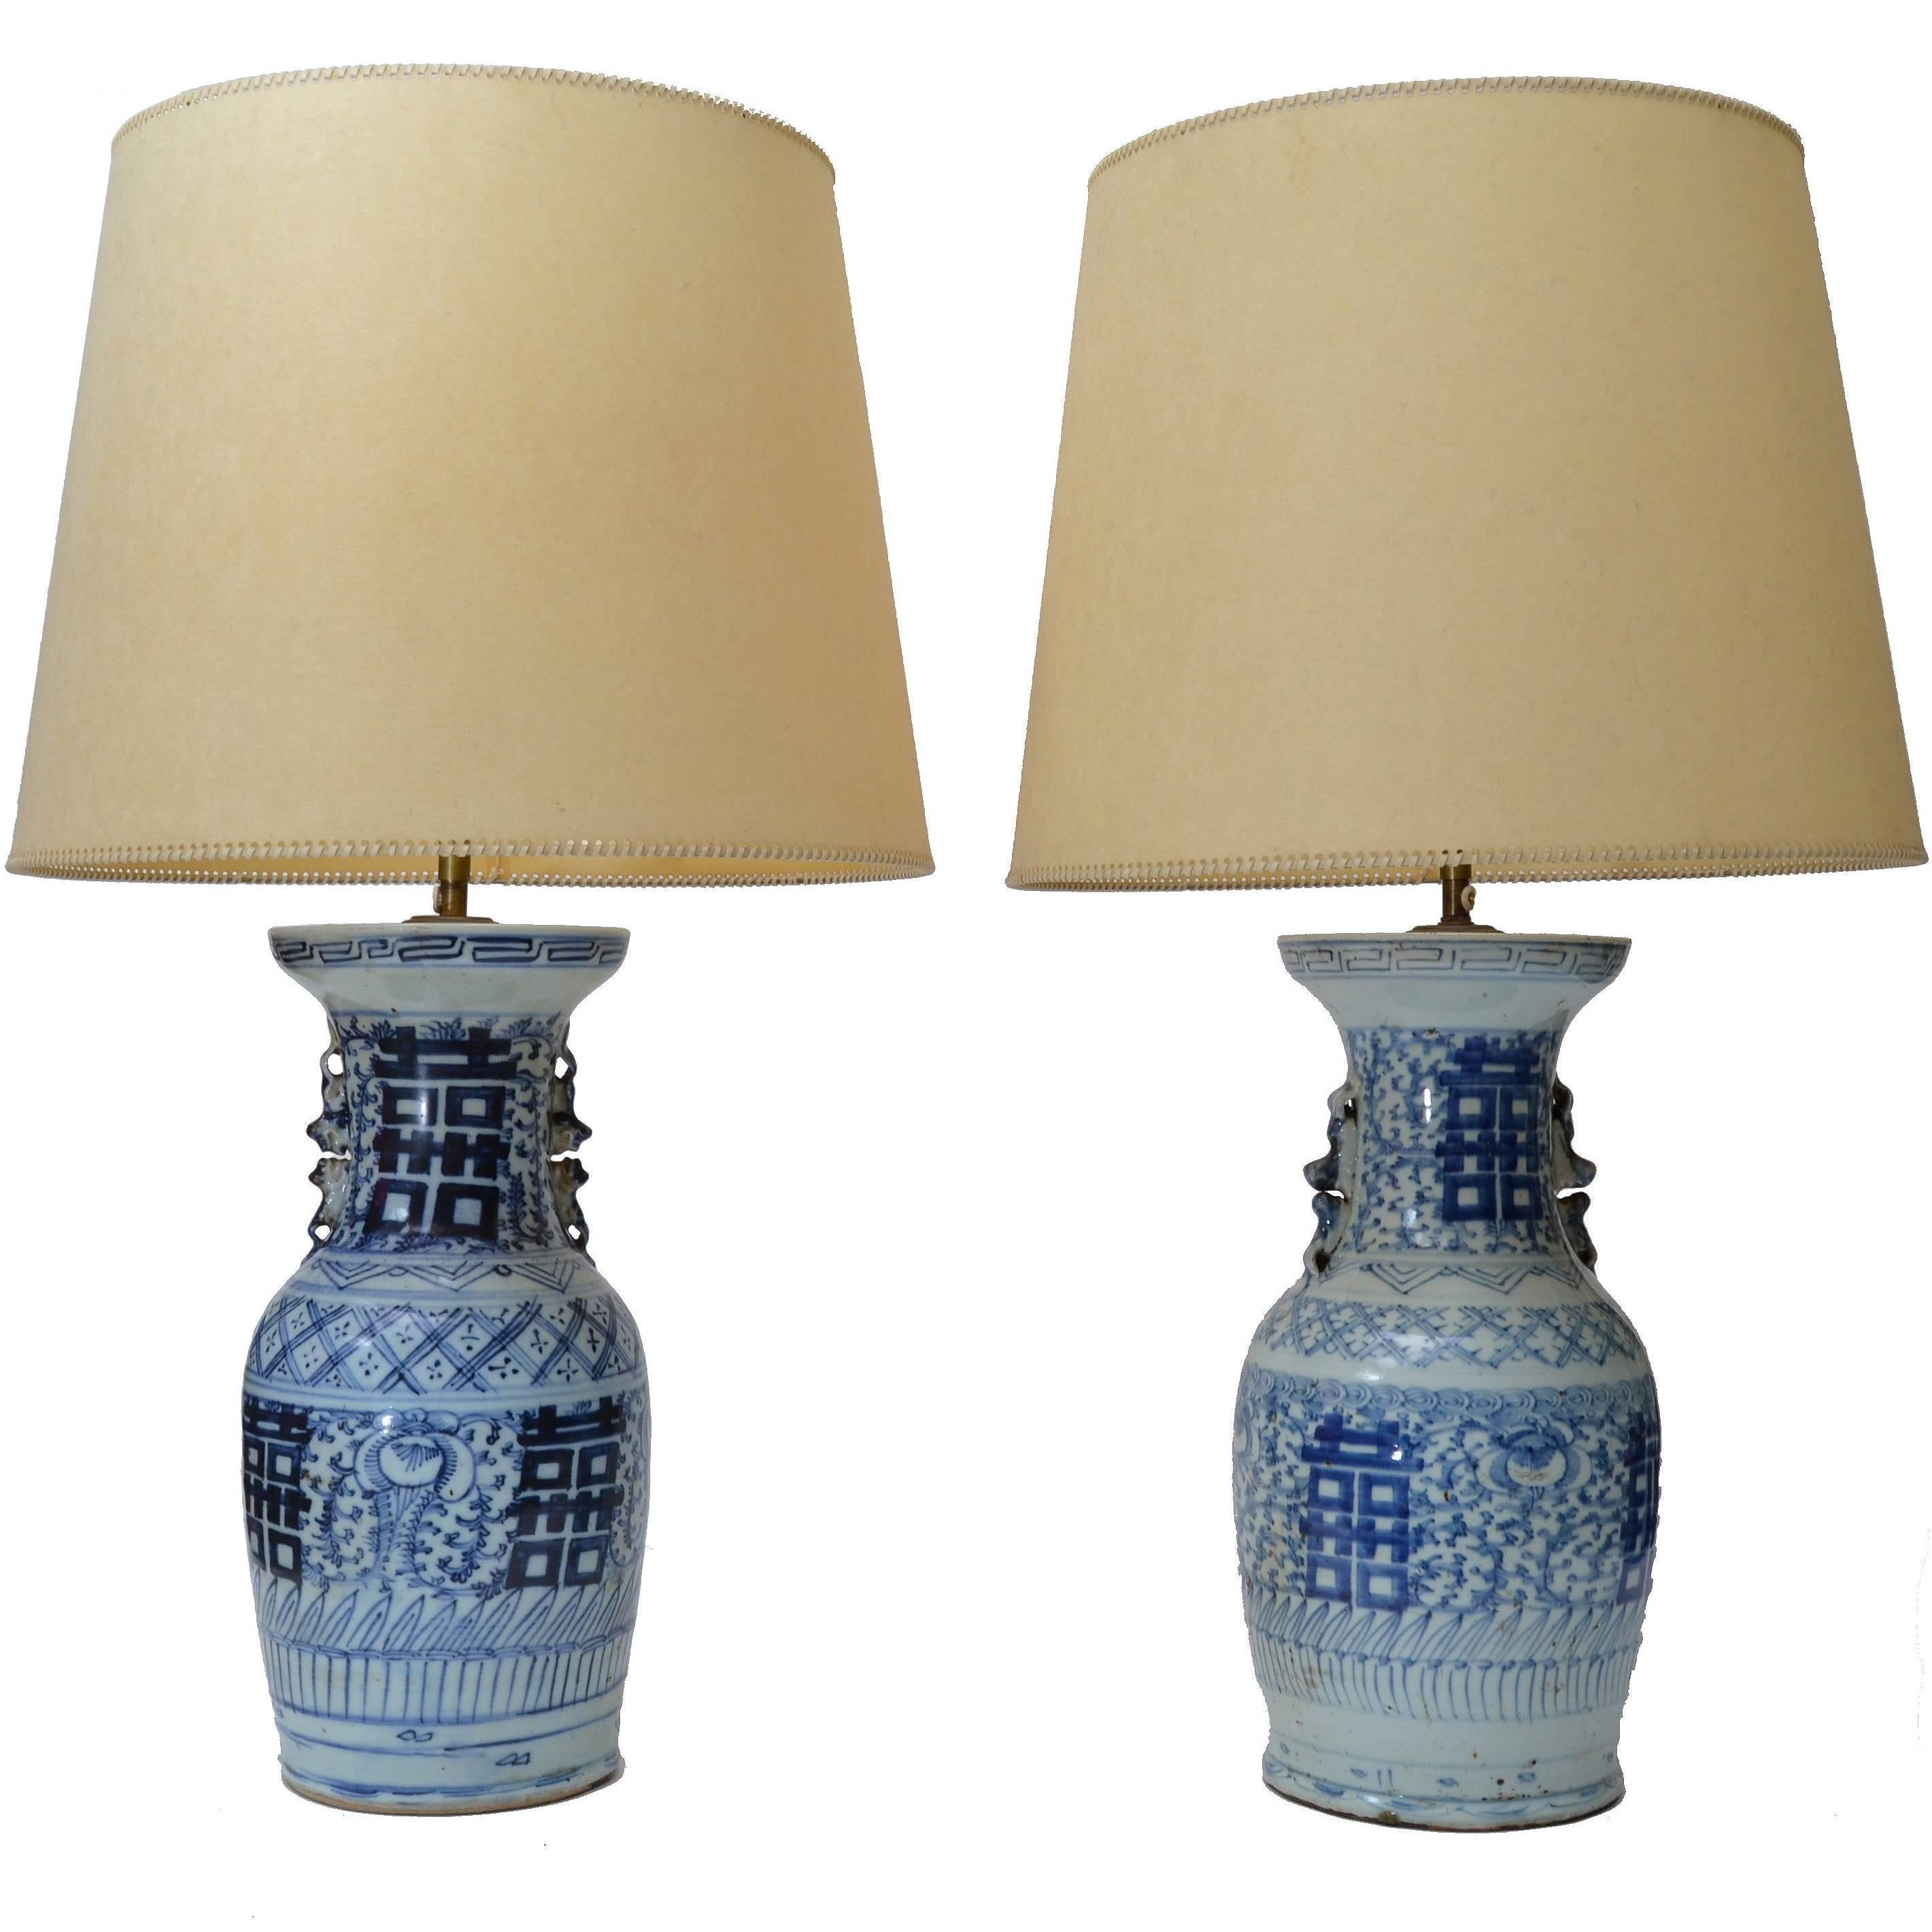 Chinese Blue Grey Pottery Table Lamps with Original Shades, Pair